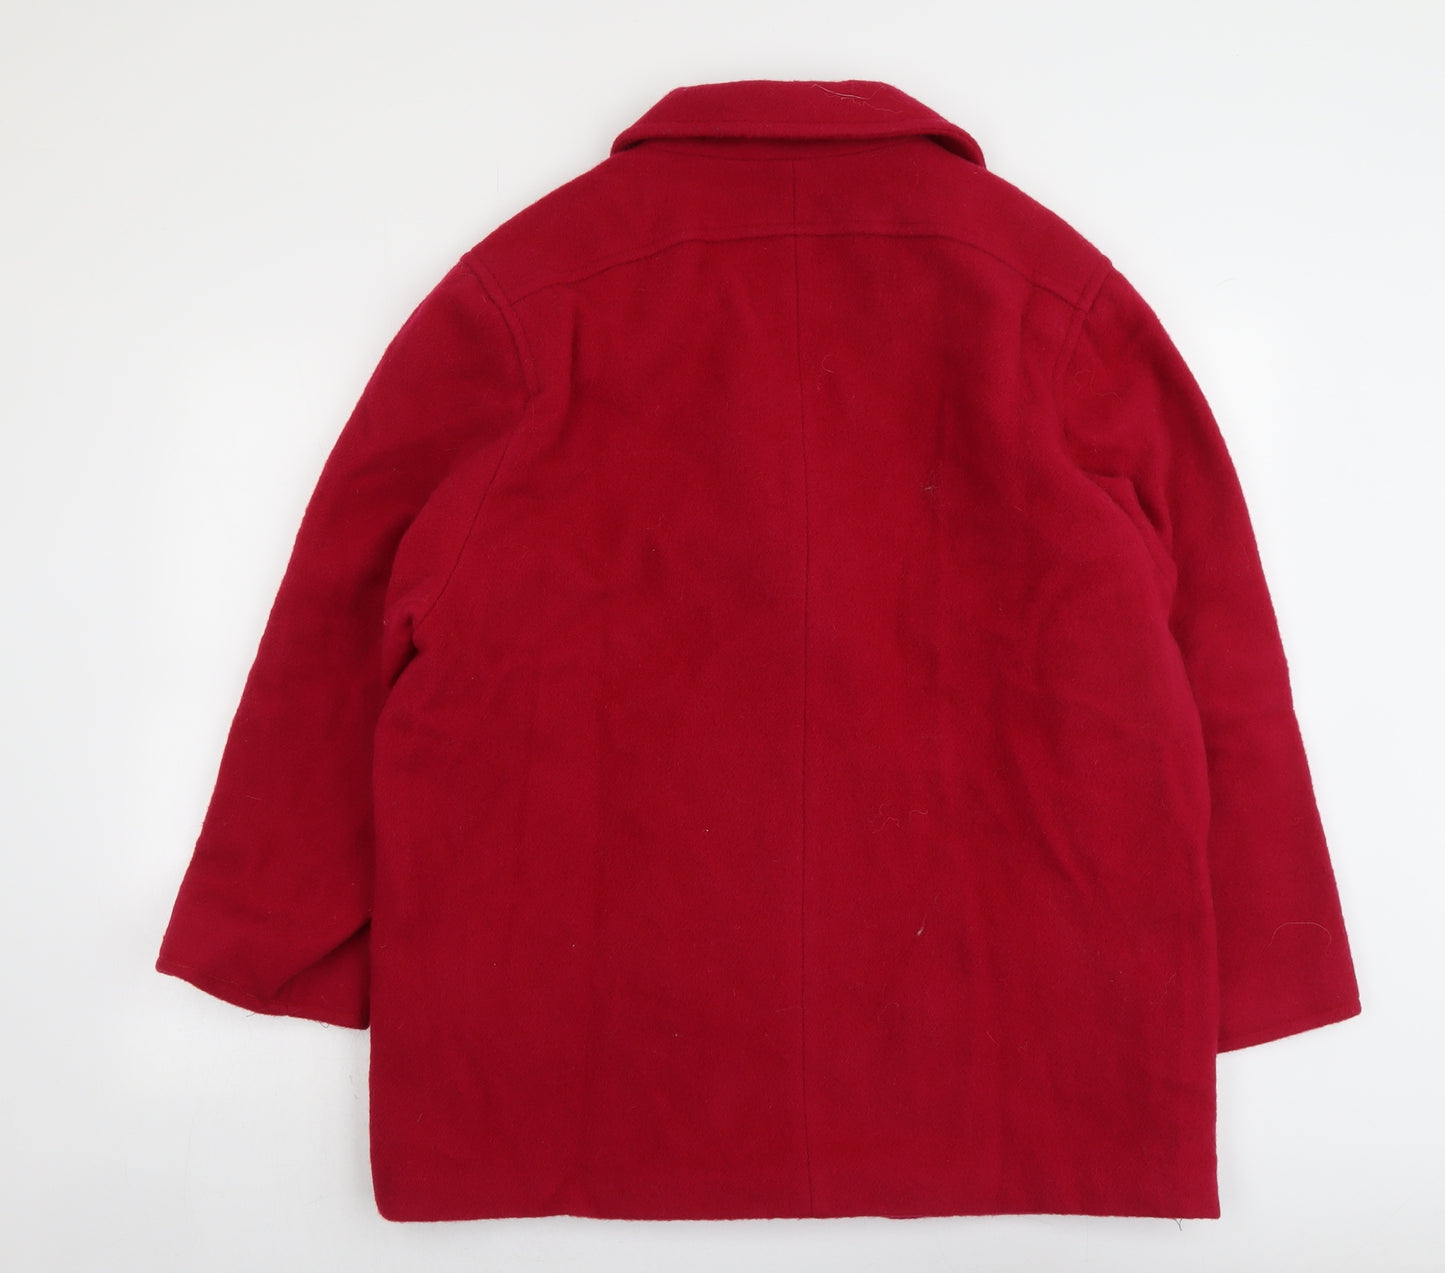 Classic Womens Red Jacket Size 20 Button